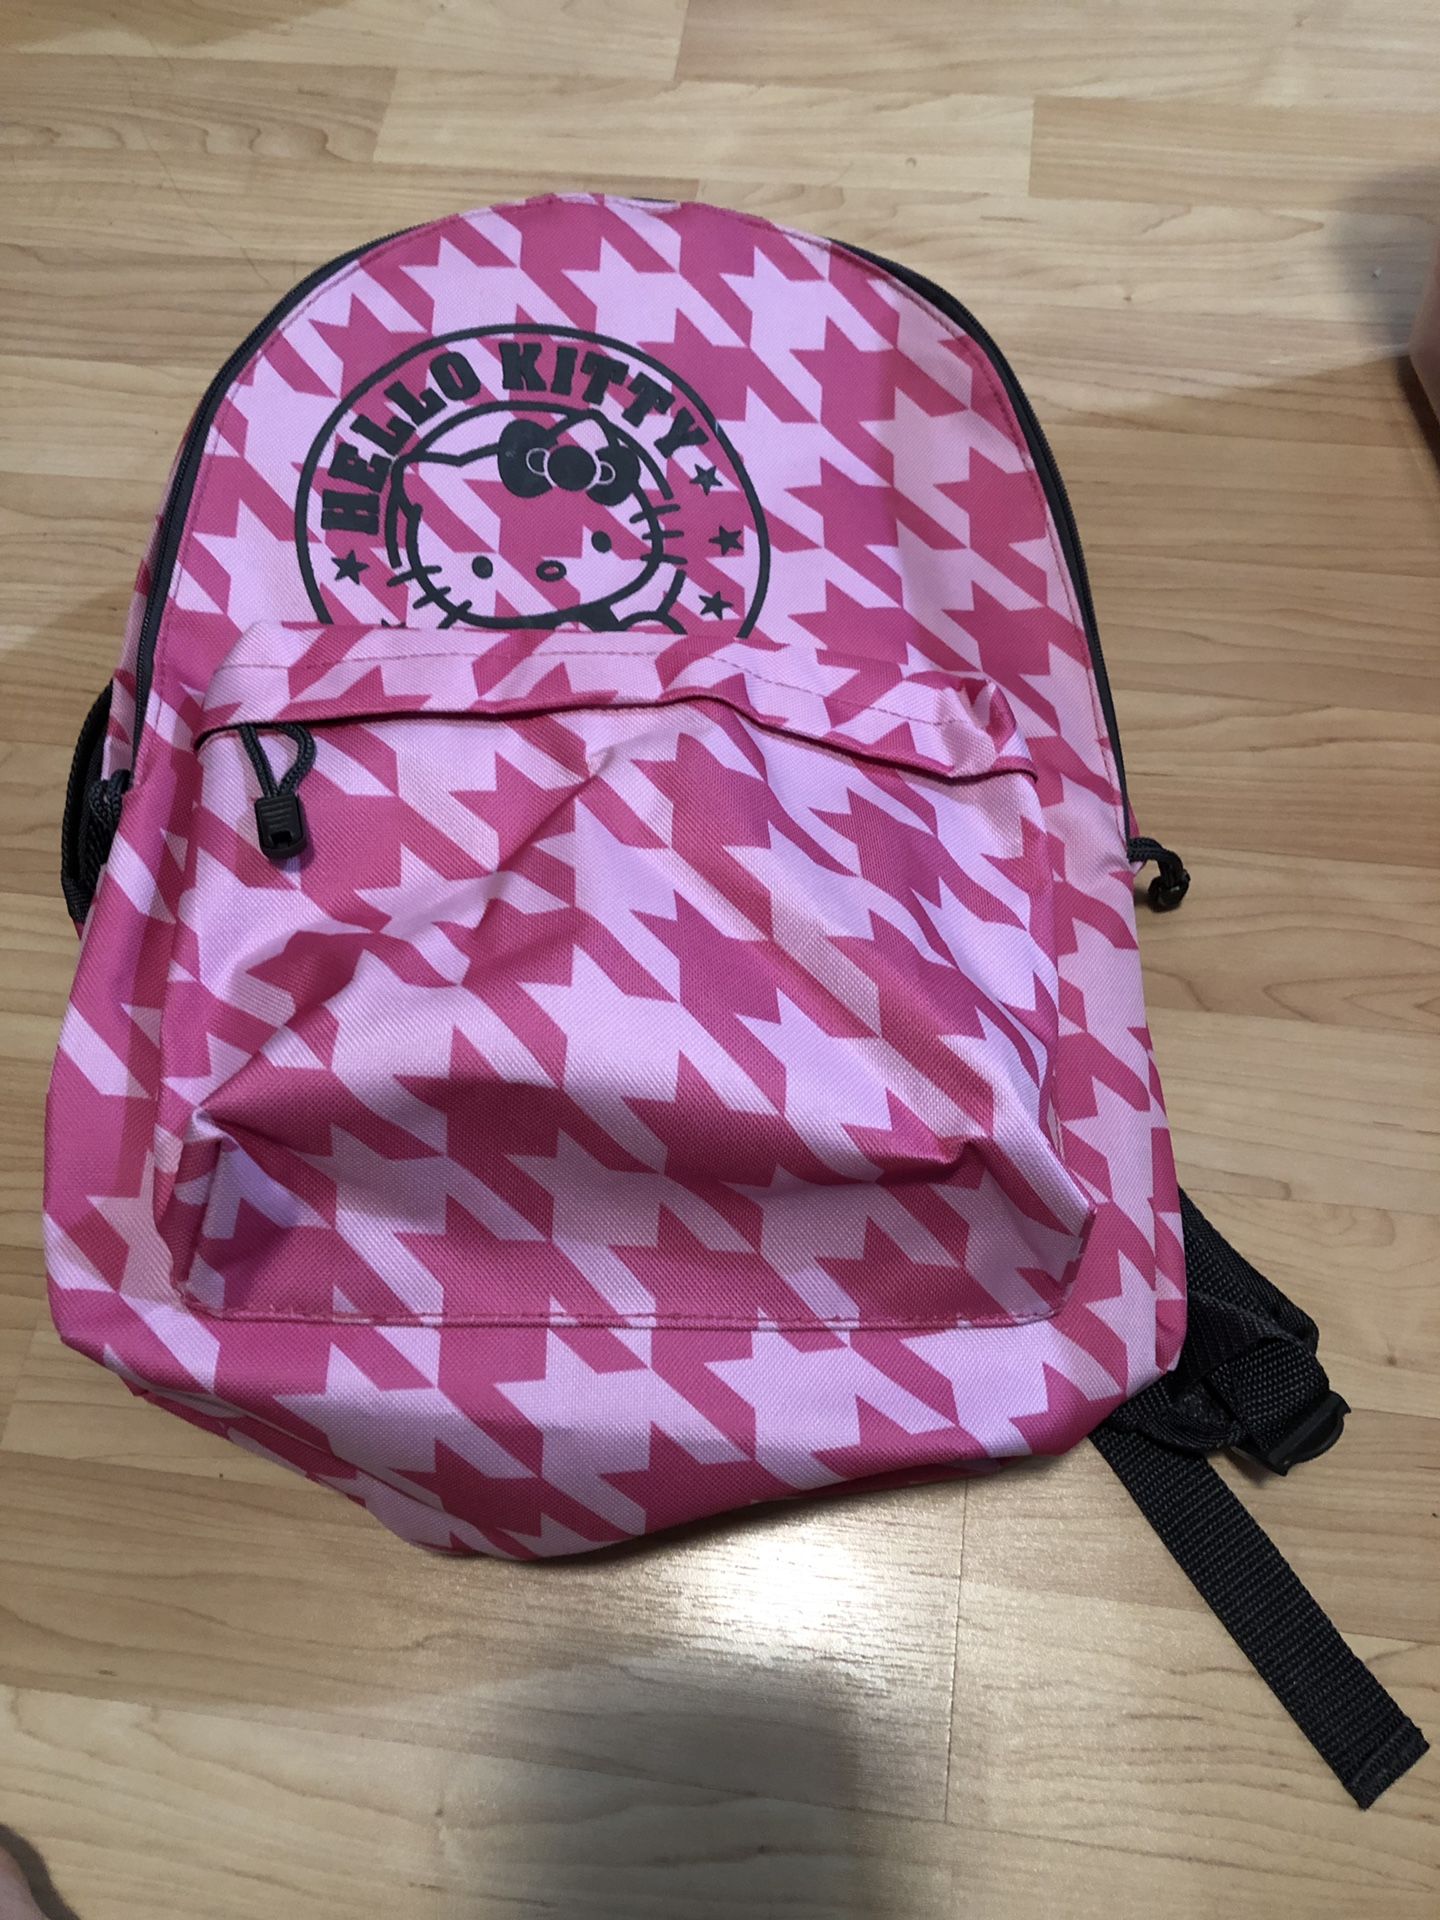 Hello Kitty school backpack - brand new never used